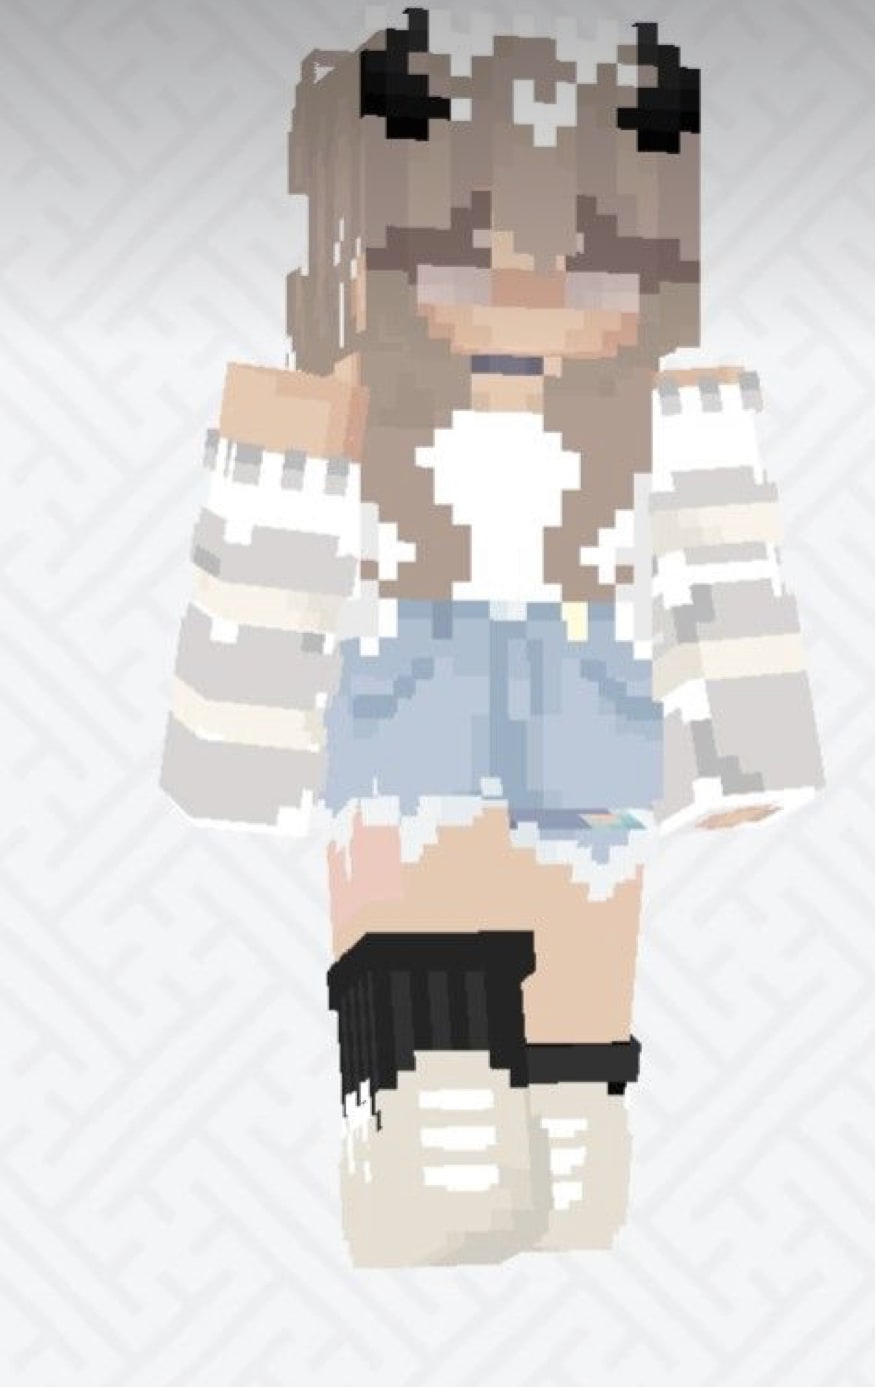 minecraft skins from scratch or edited